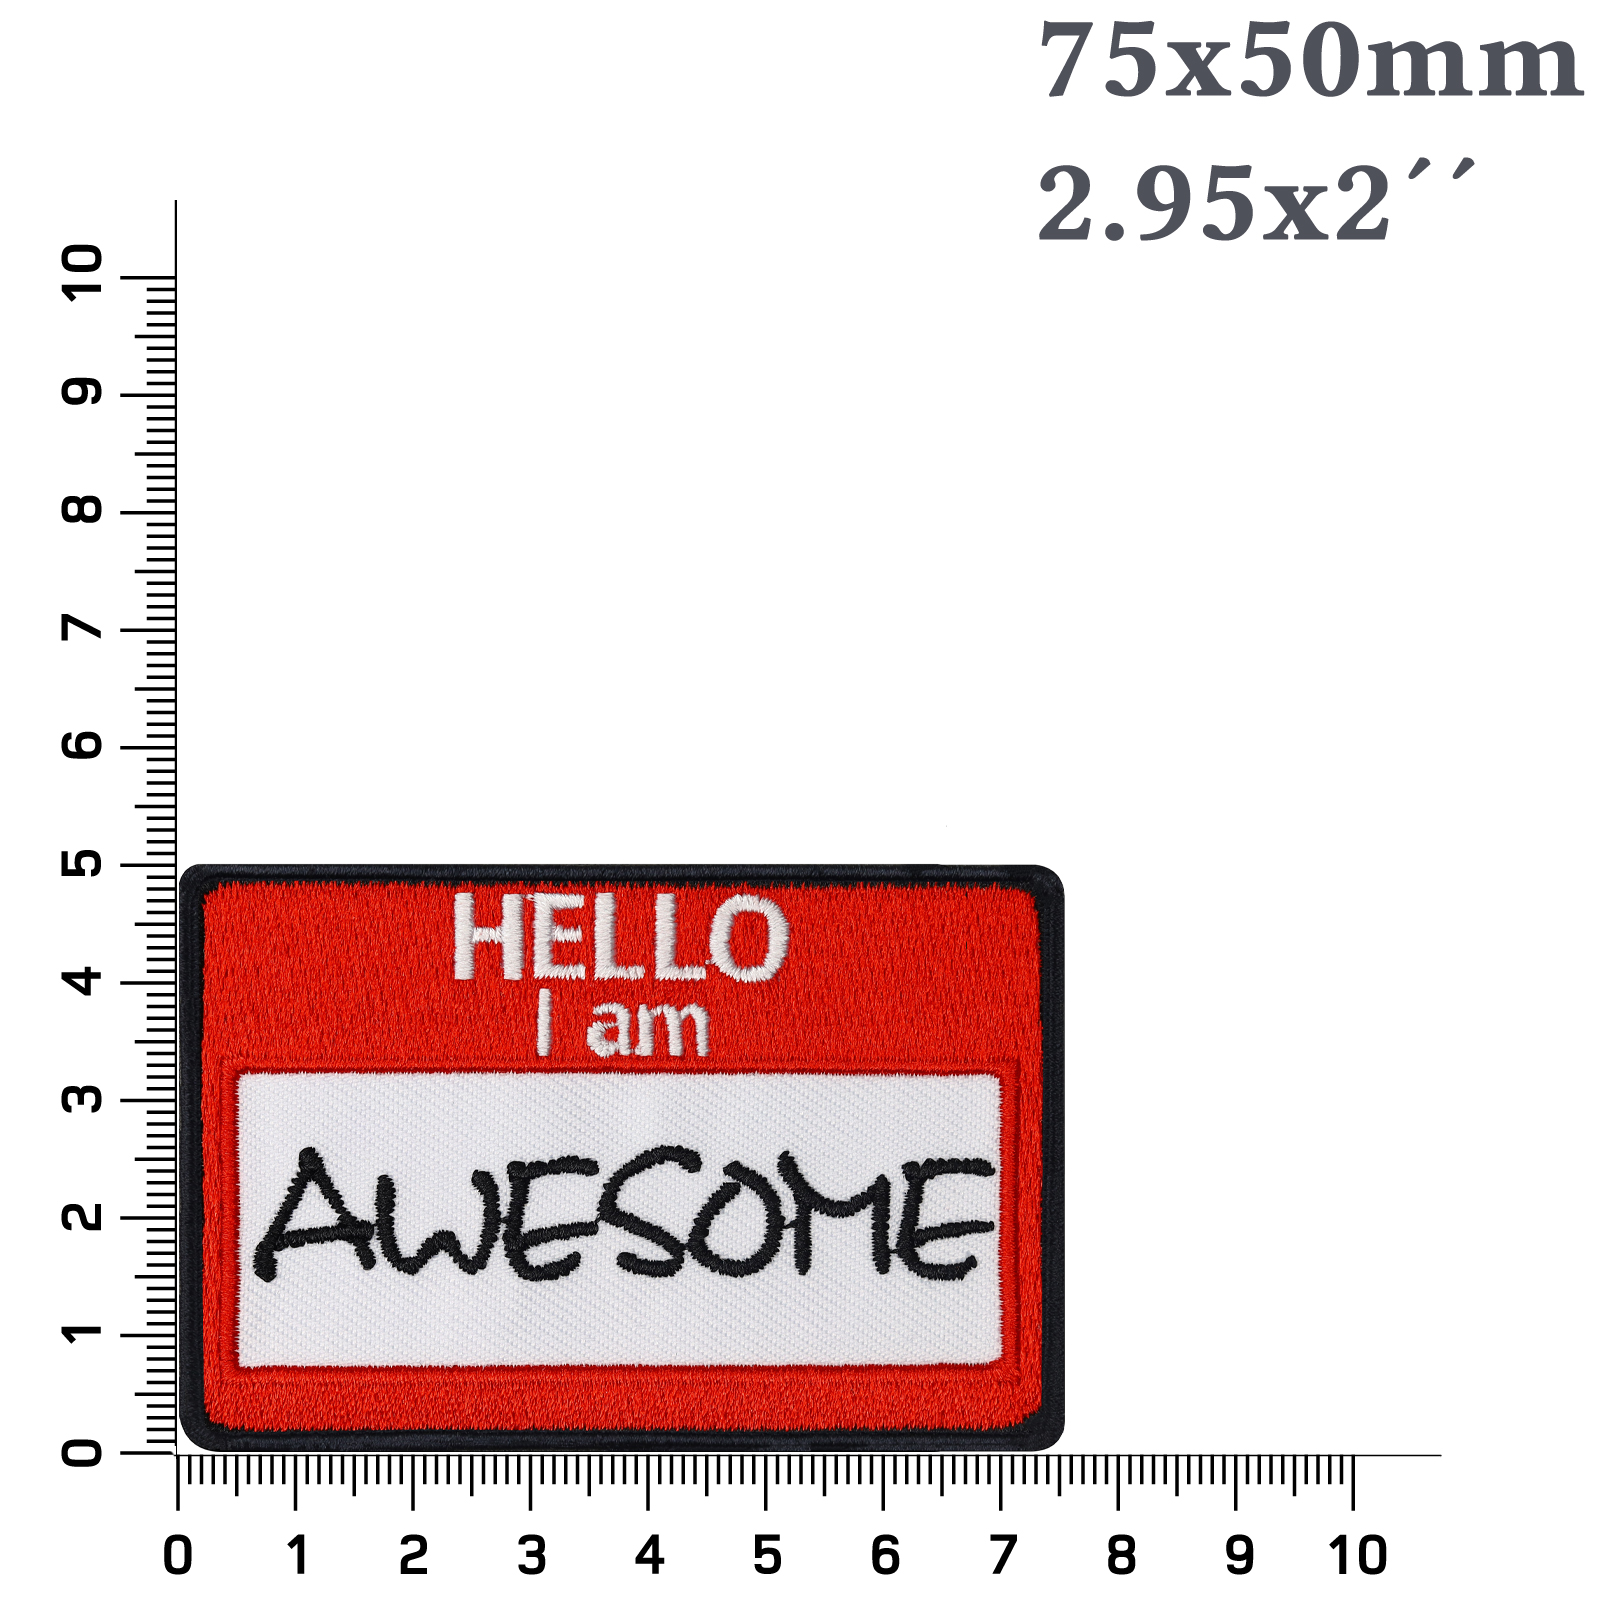 Hello, I am... awesome - Patch